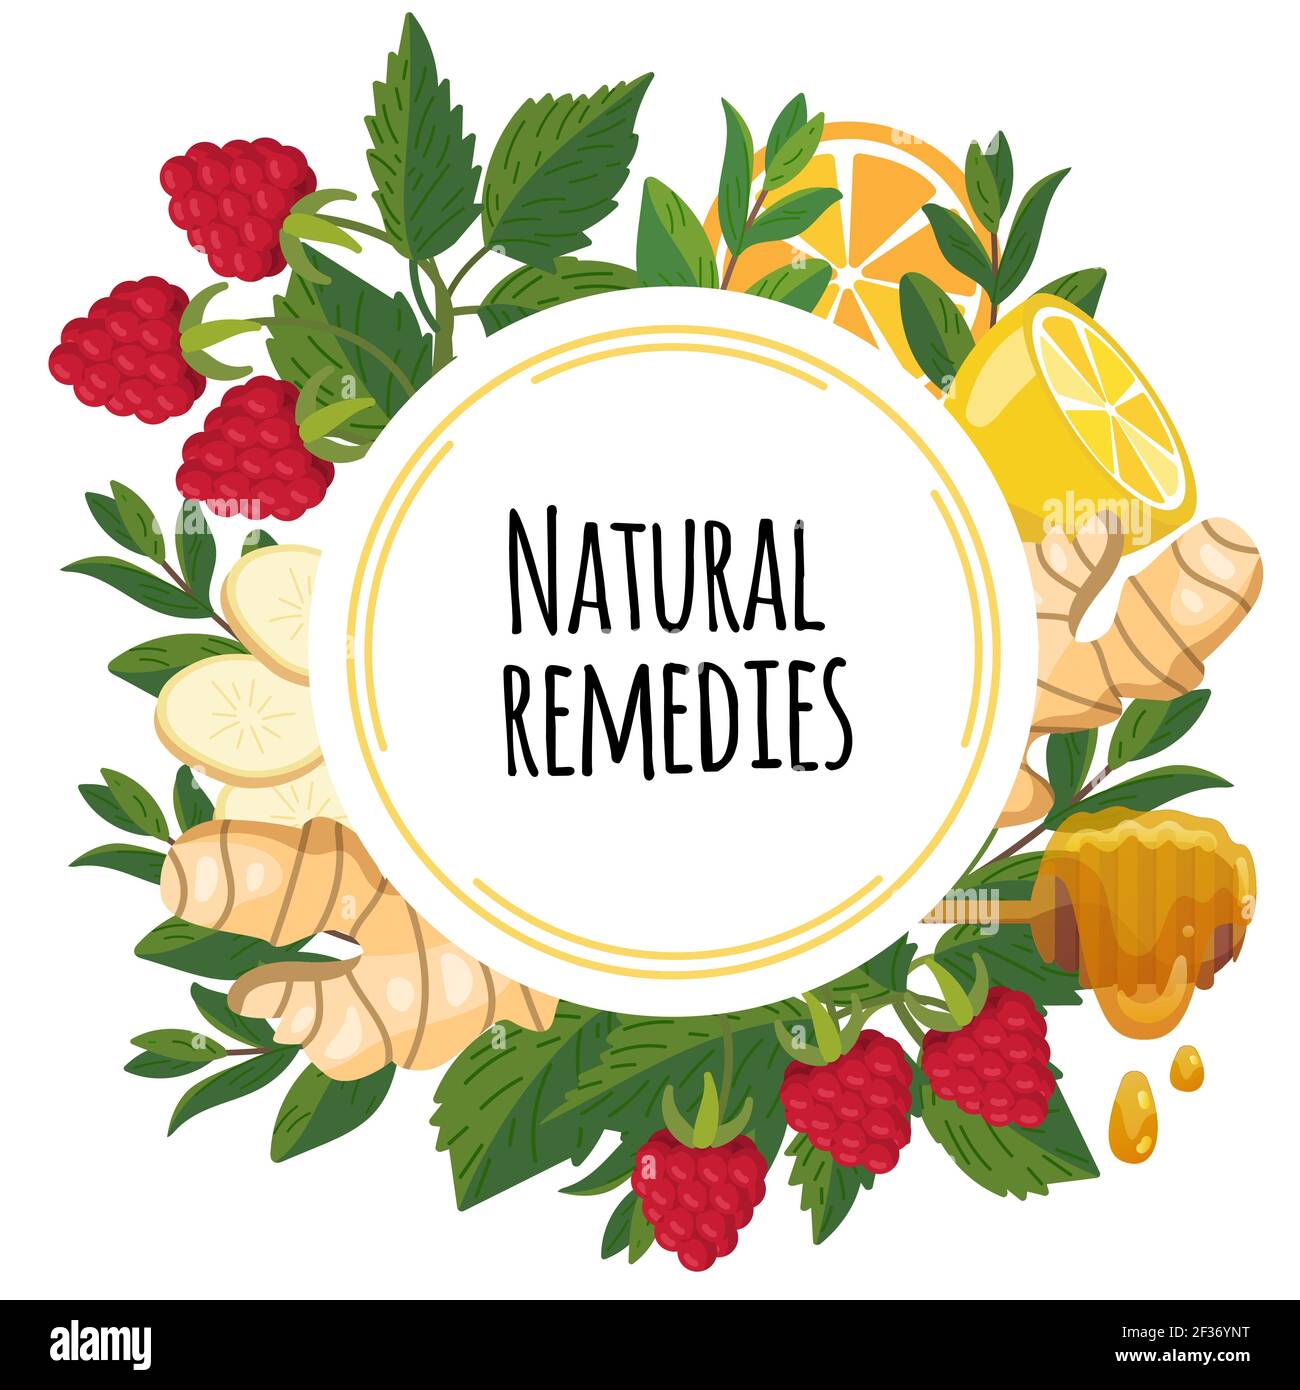 Natural remedies frame with healthy ingredients - ginger, mint, lemon, raspberry. Folk herbal natural medicine. Home treatment for colds, flu, runny Stock Vector